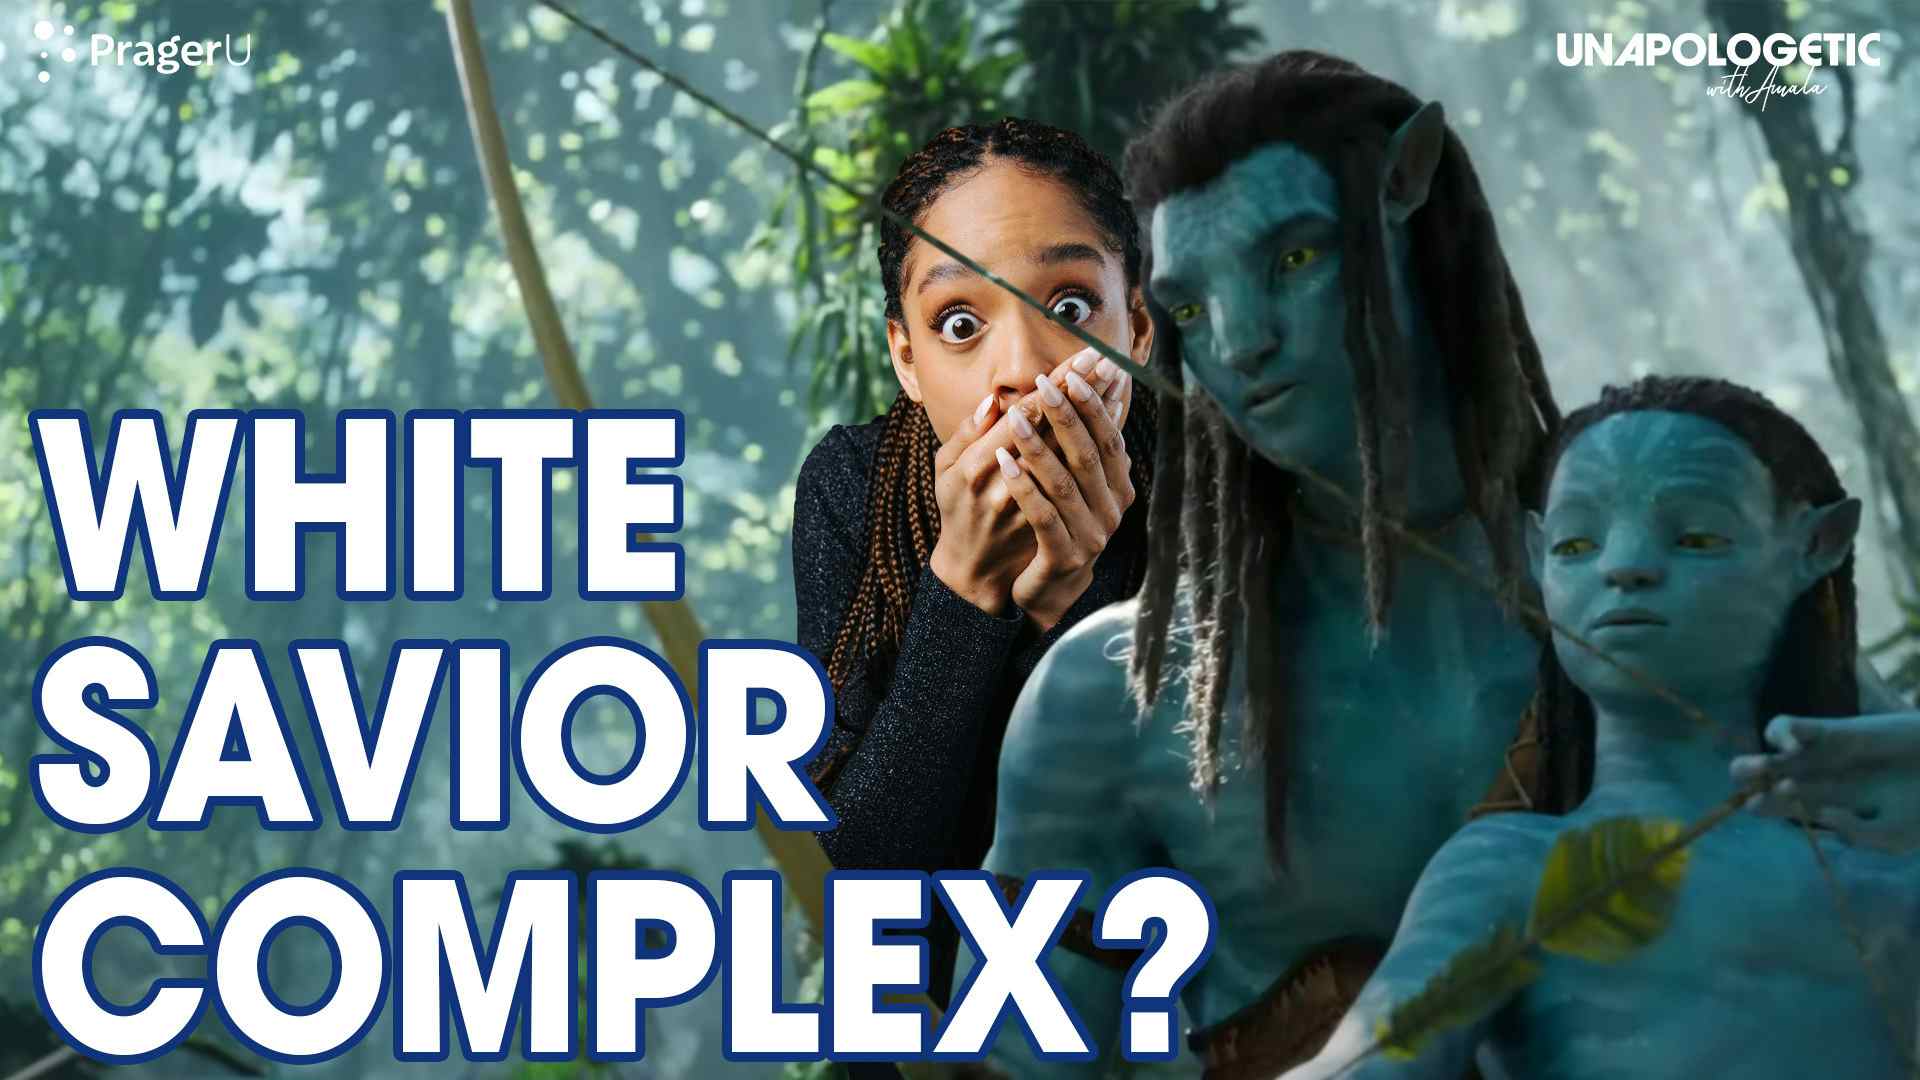 Avatar 2 Called Out for “White Savior Complex” & “Cultural Appropriation”?: 12/22/2022